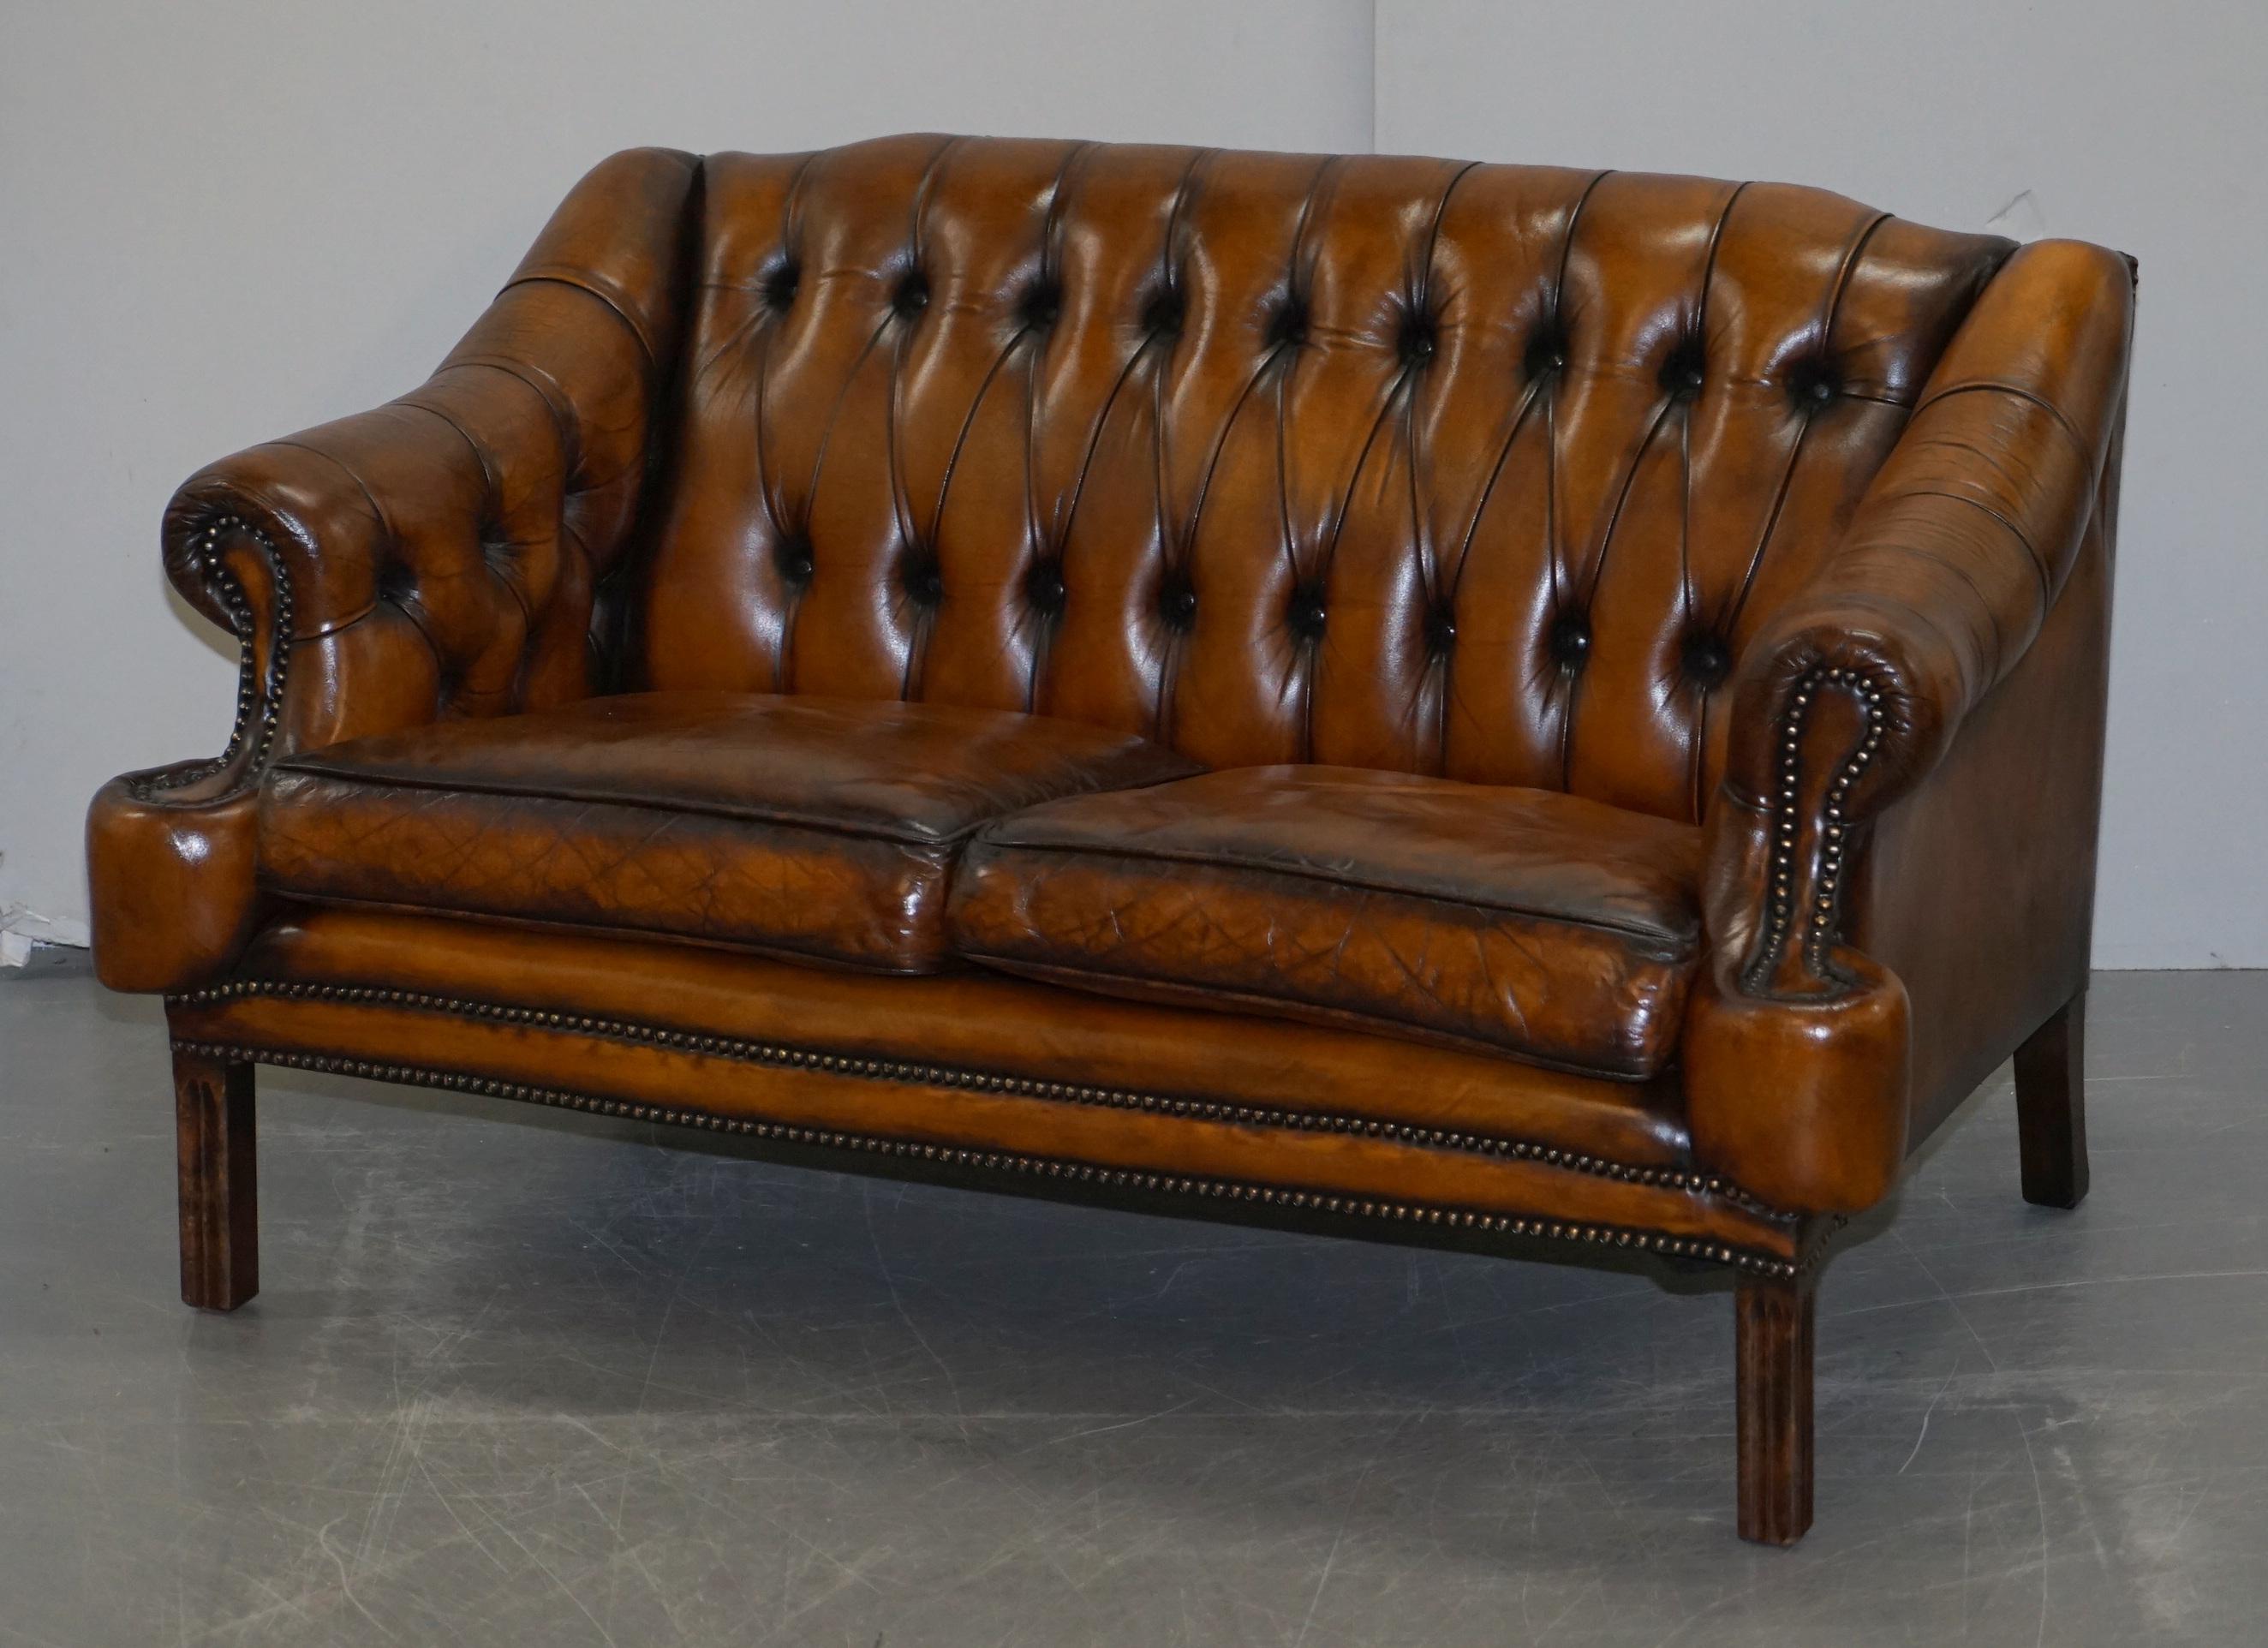 Victorian Restored Lutyen's Viceroy Style Chesterfield Brown Leather Hand Dyed 2-Seat Sofa